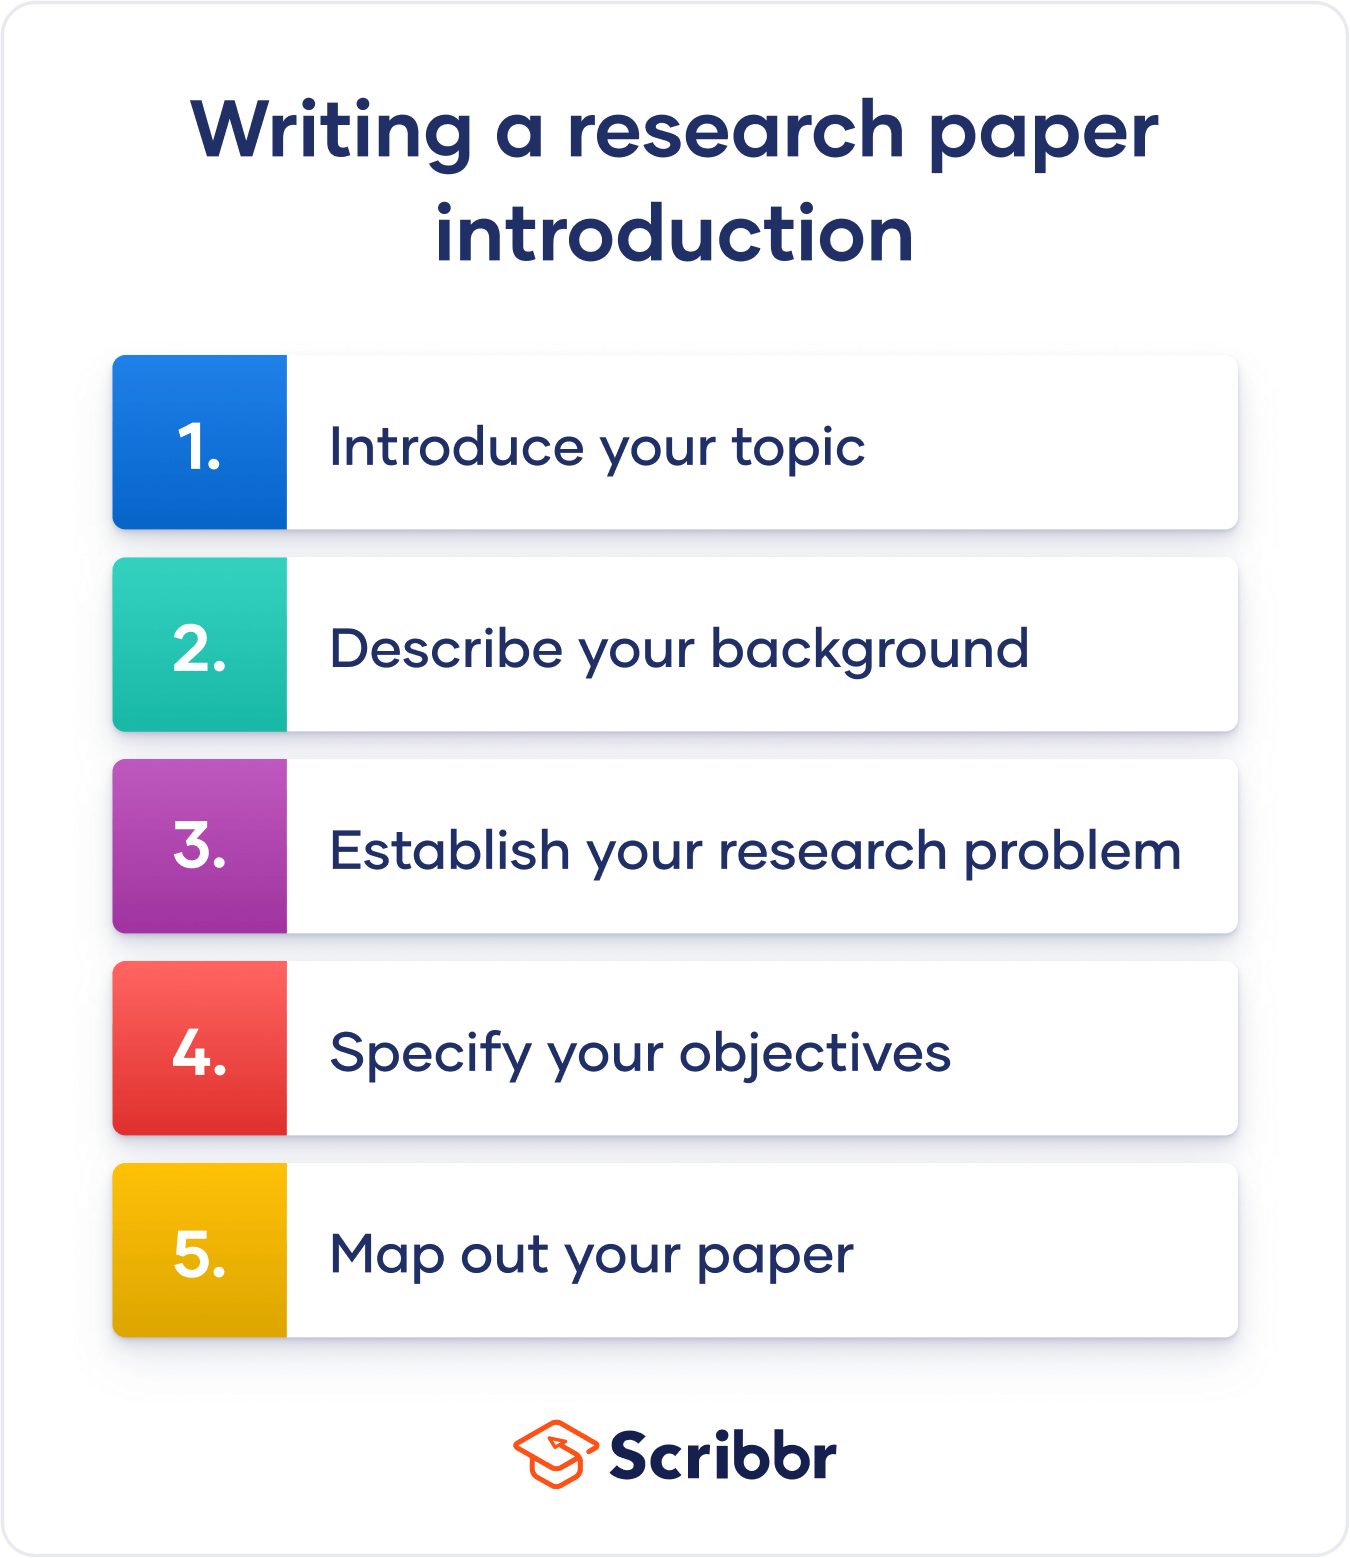 Writing A Research Paper Introduction | Step-By-Step Guide